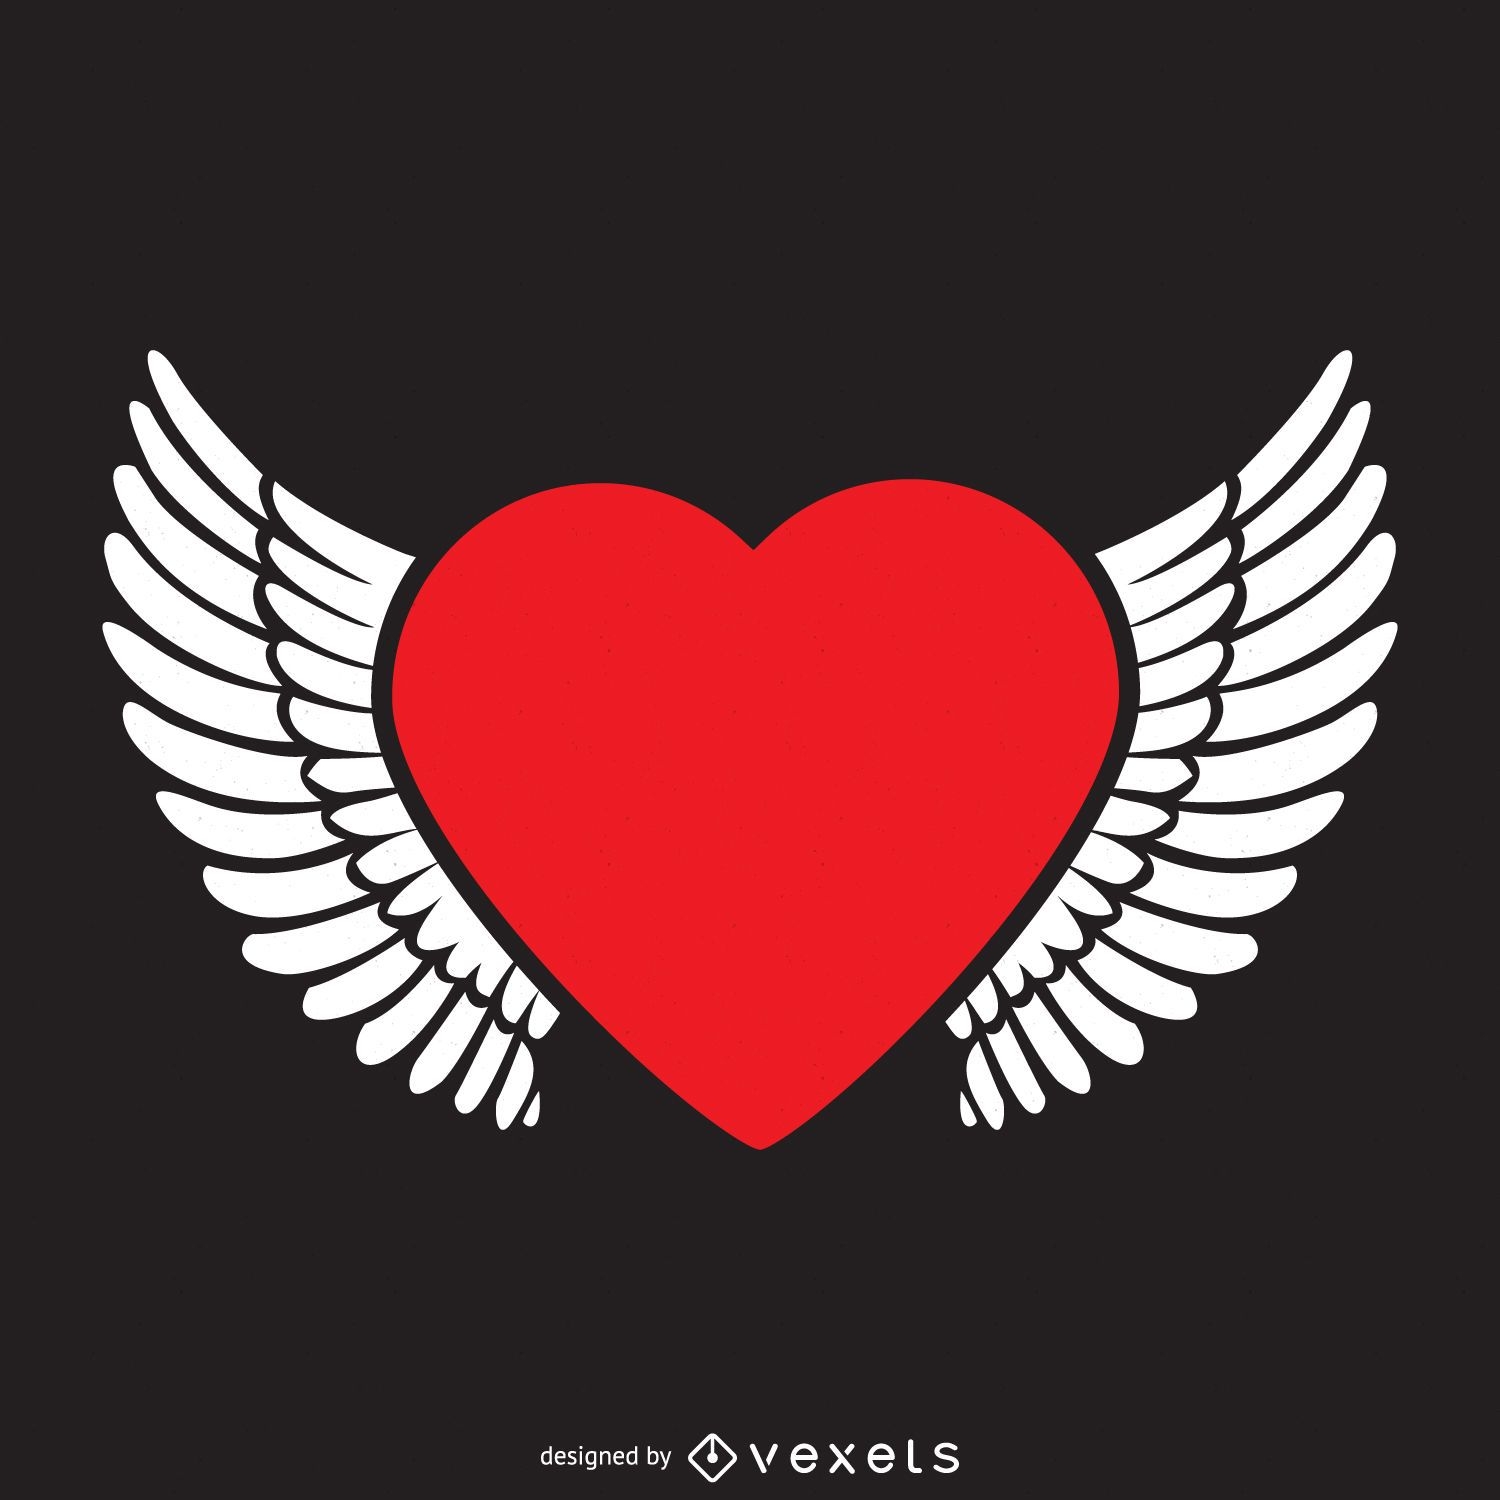 Heart with wings logo template